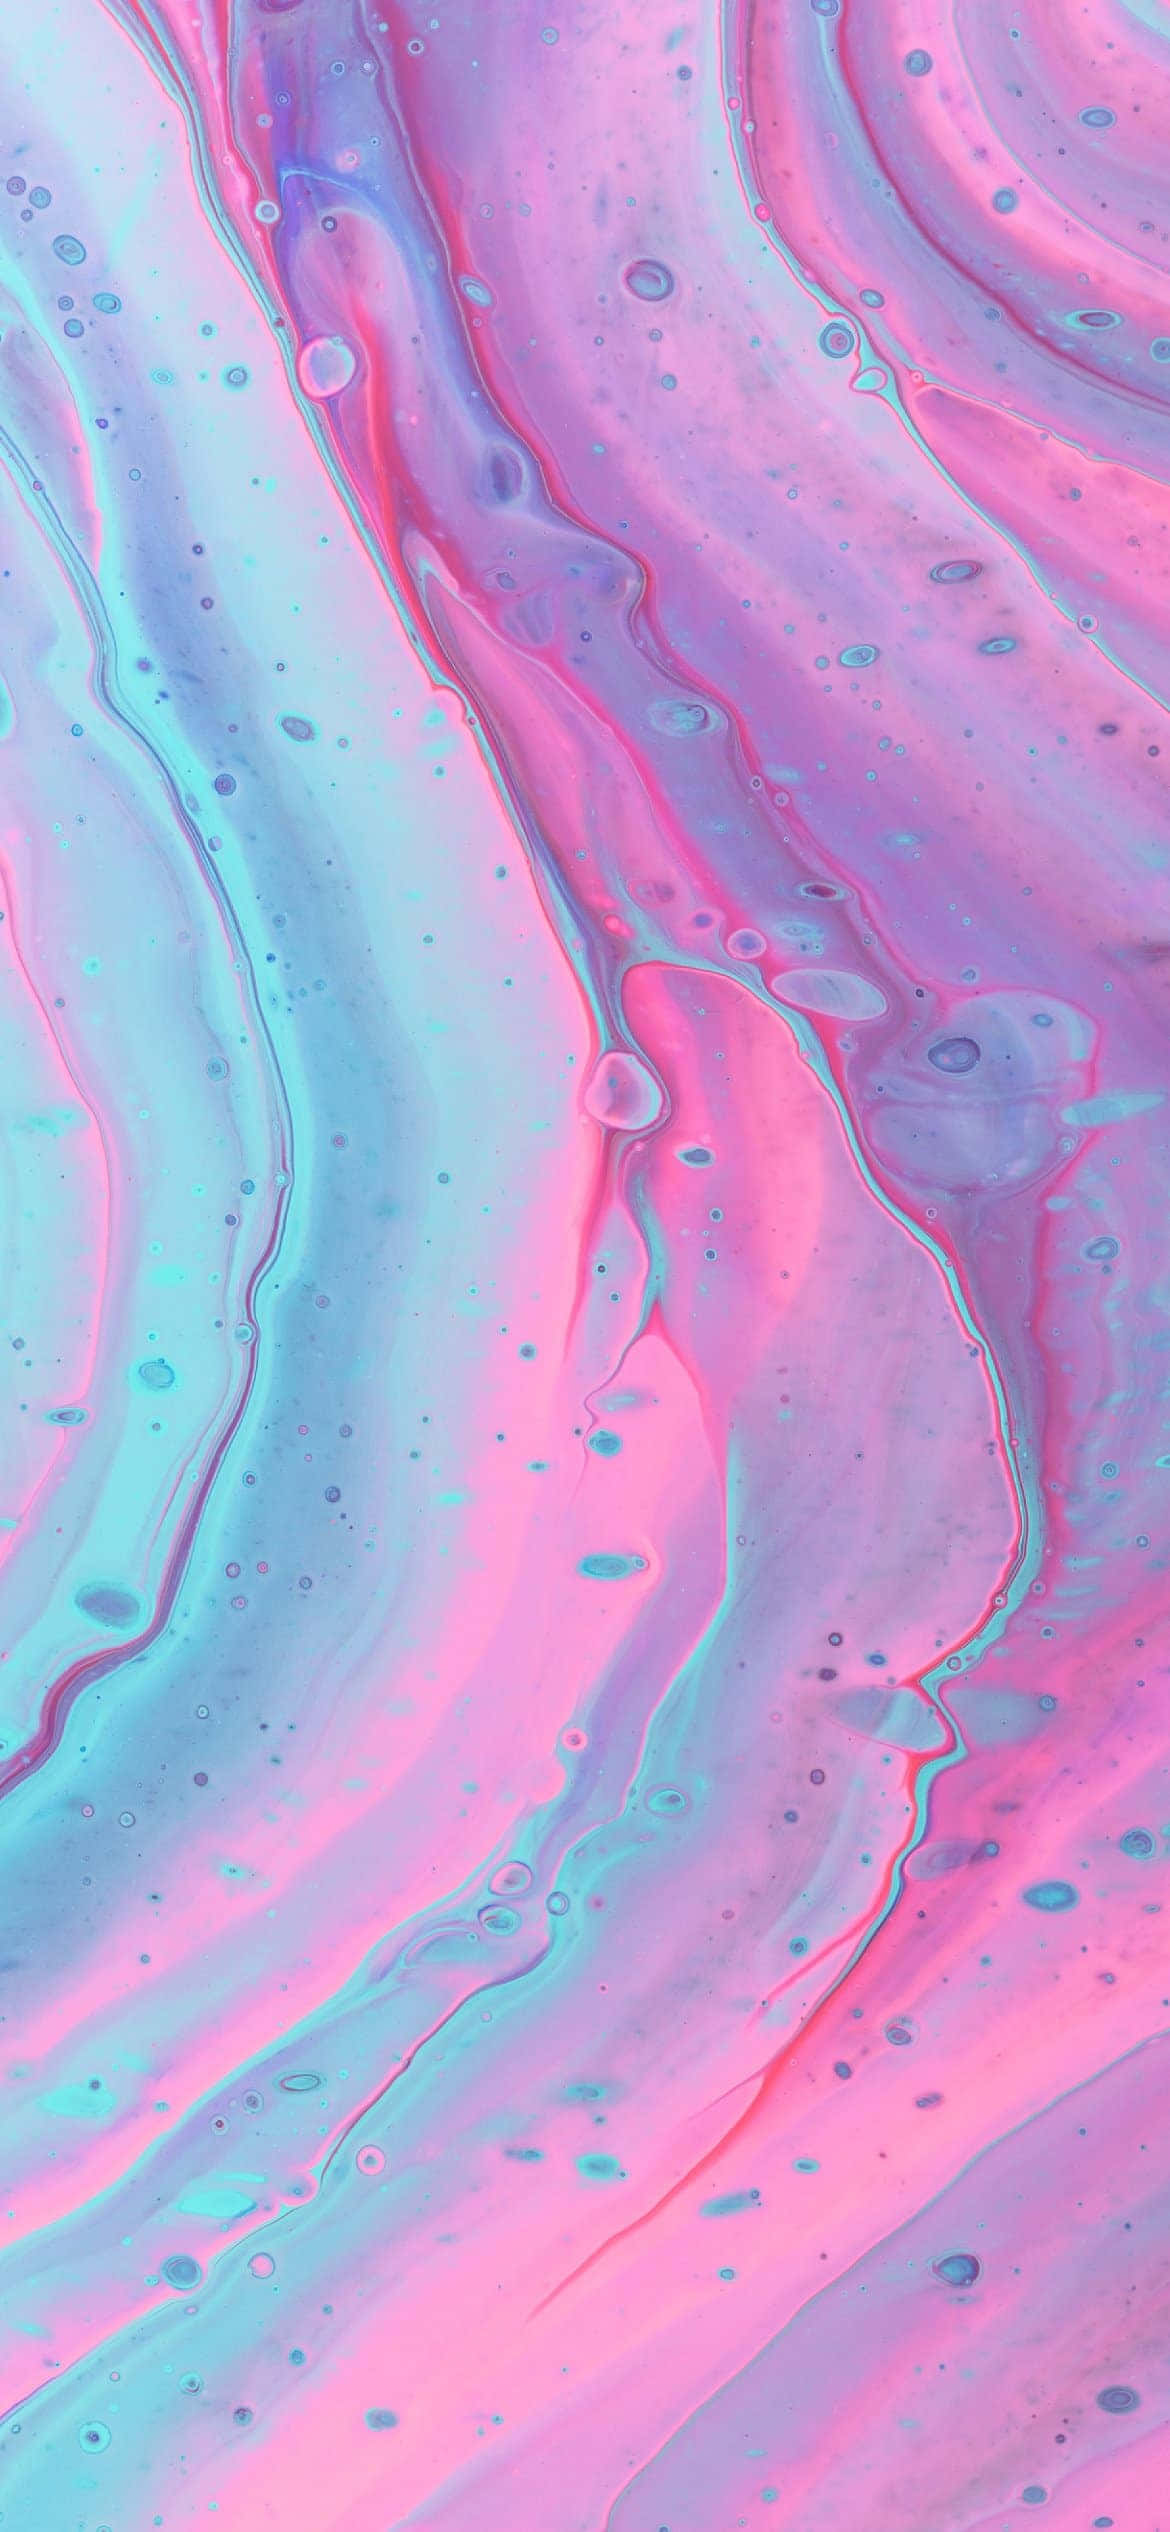 A Pink And Blue Liquid